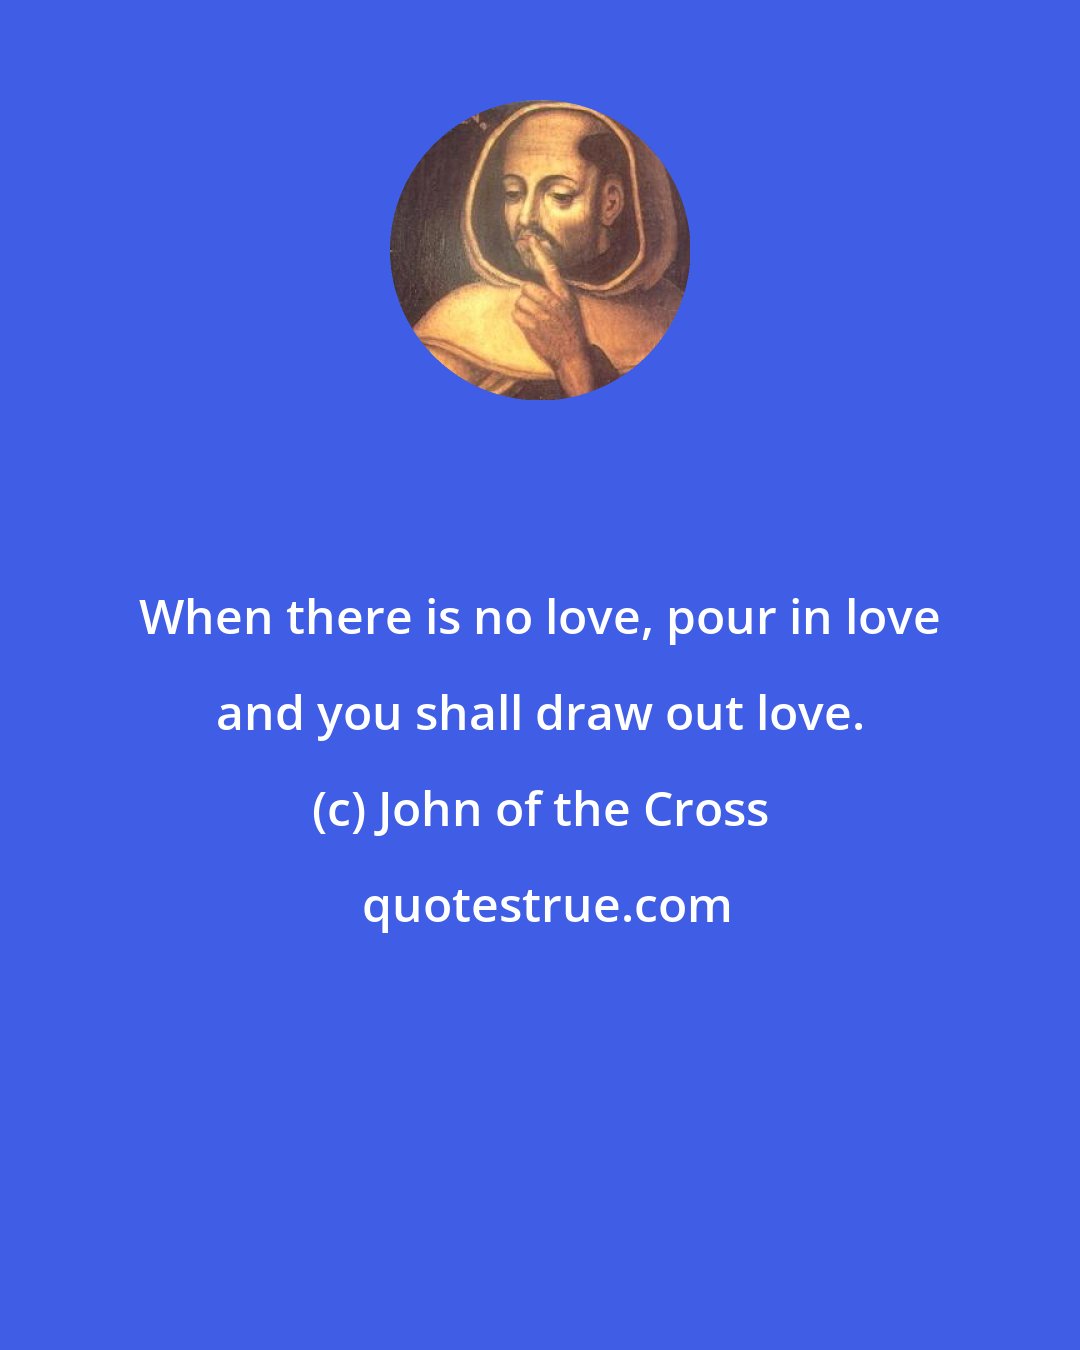 John of the Cross: When there is no love, pour in love and you shall draw out love.